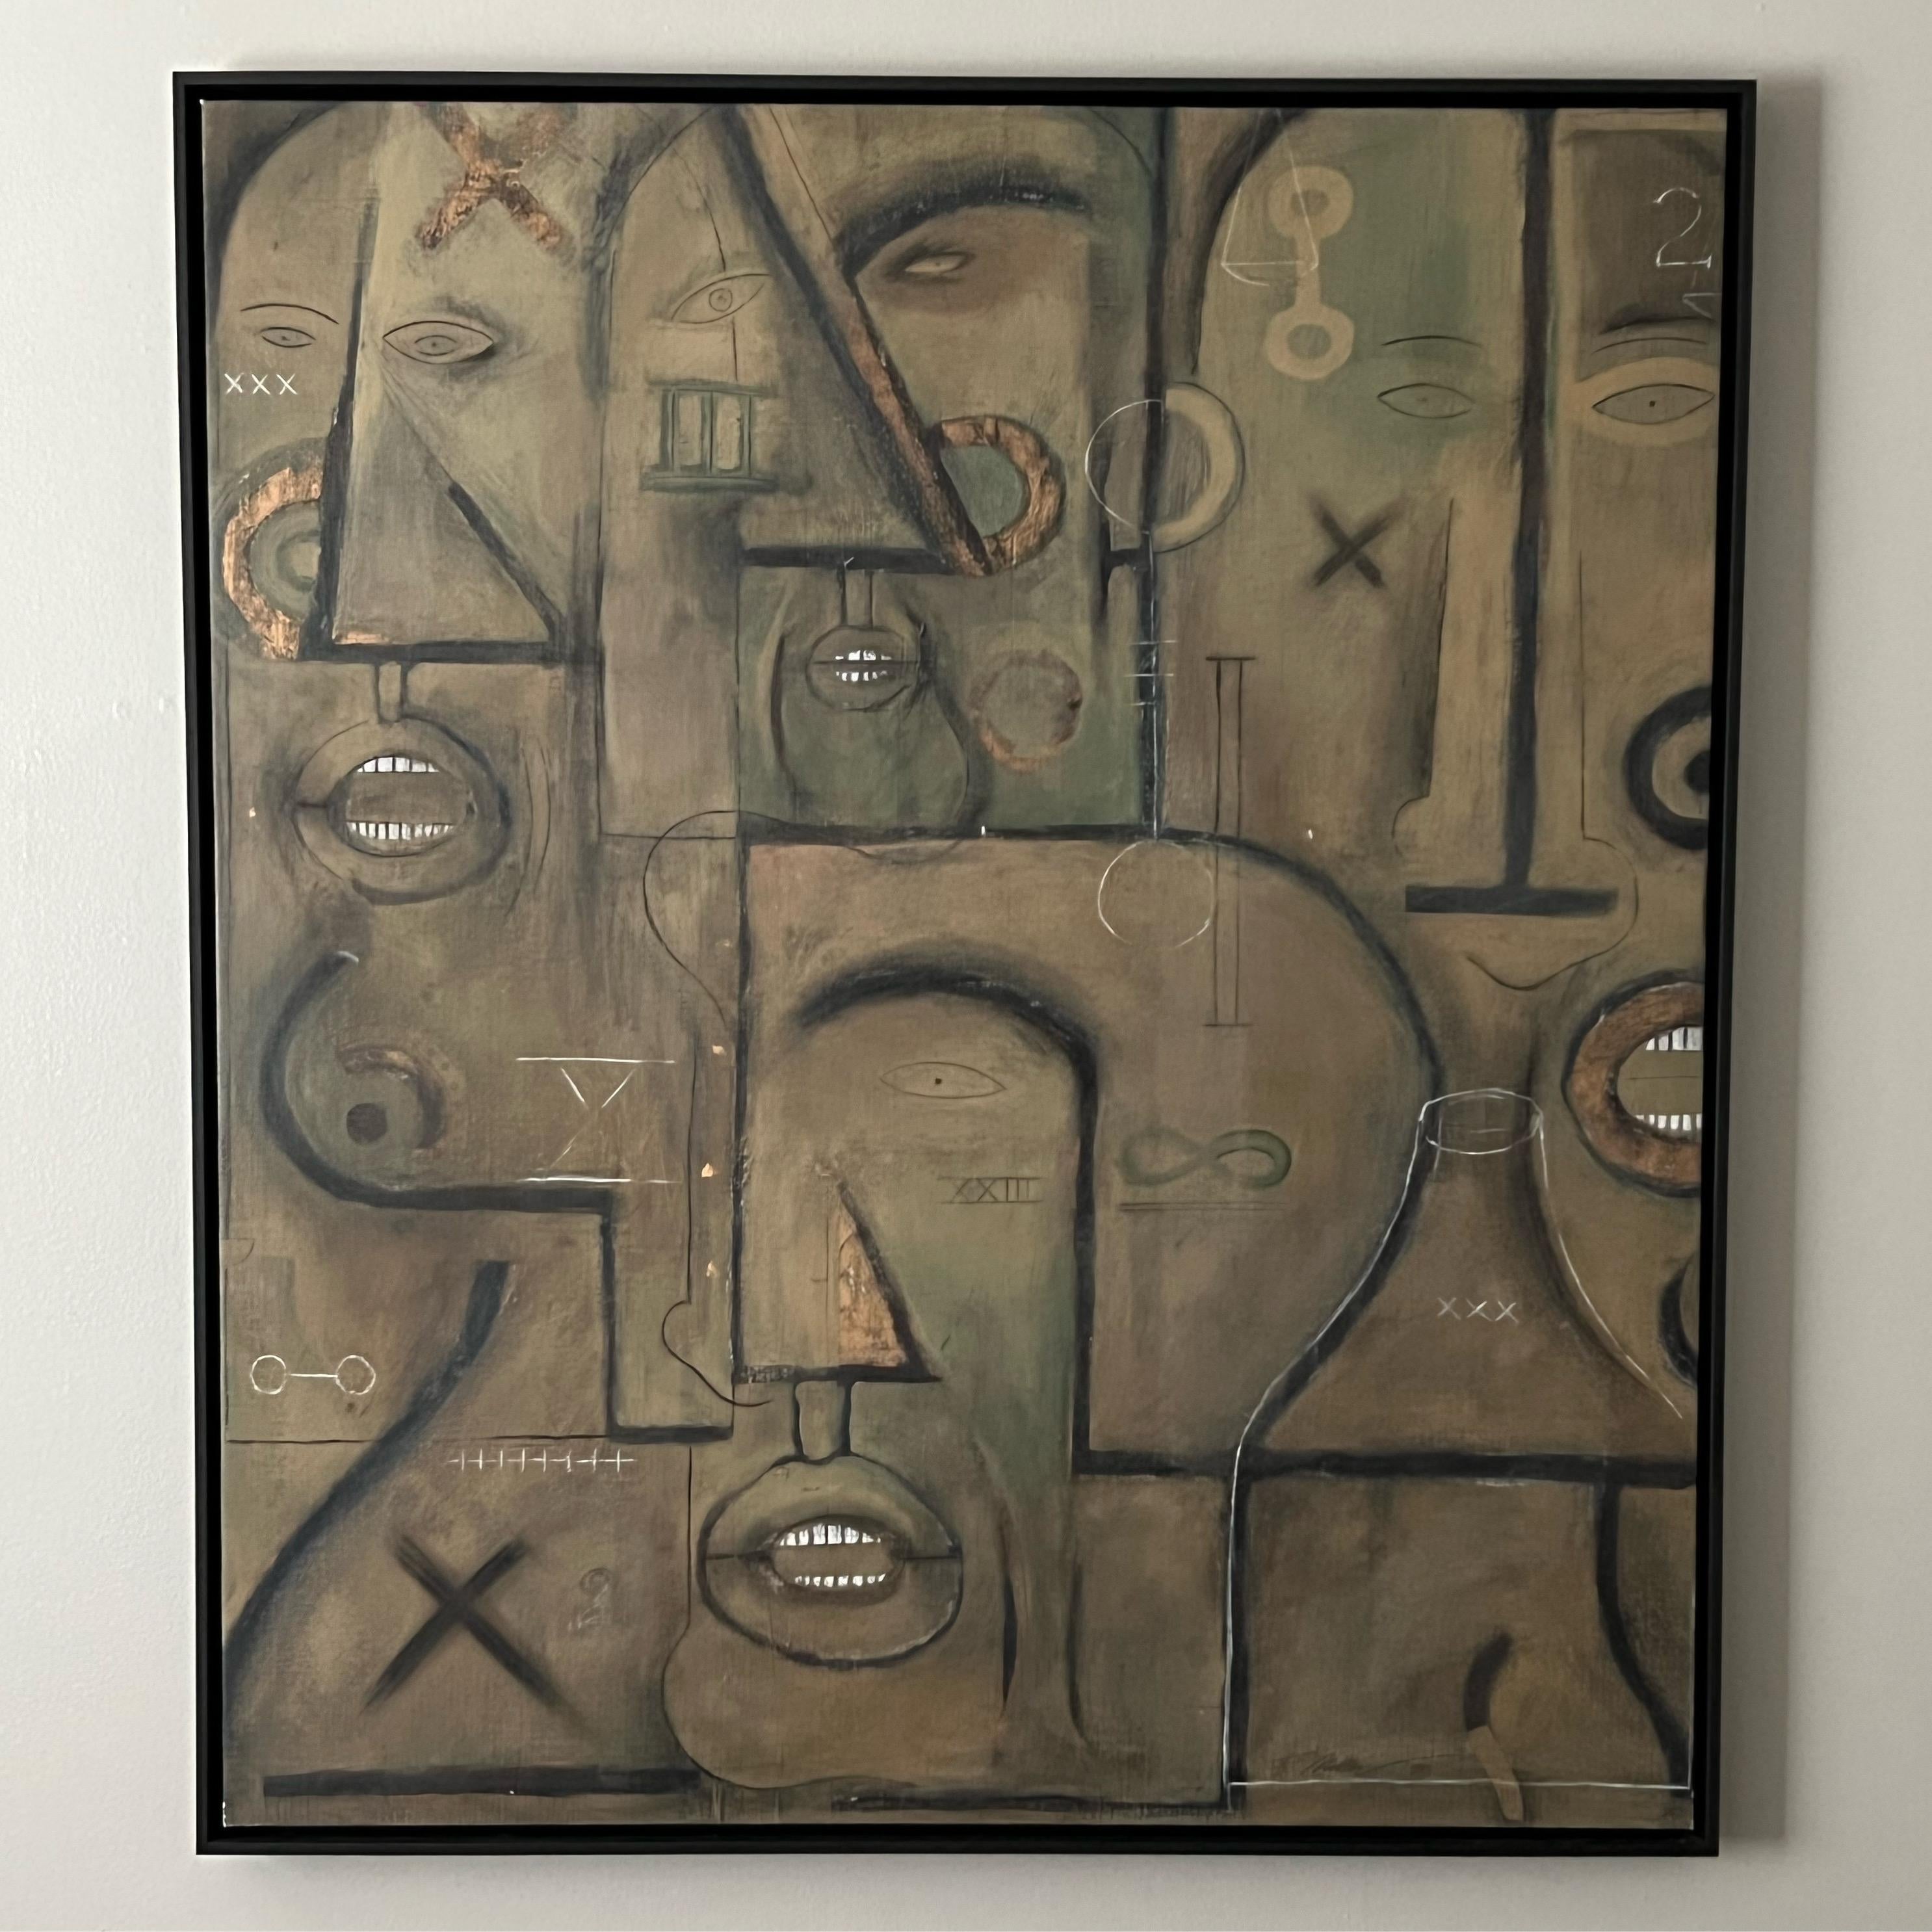 Cubist artwork, acrylic on canvas, by F. Miller, 1998. Dimensions: W42.5” x D2” x H49”.